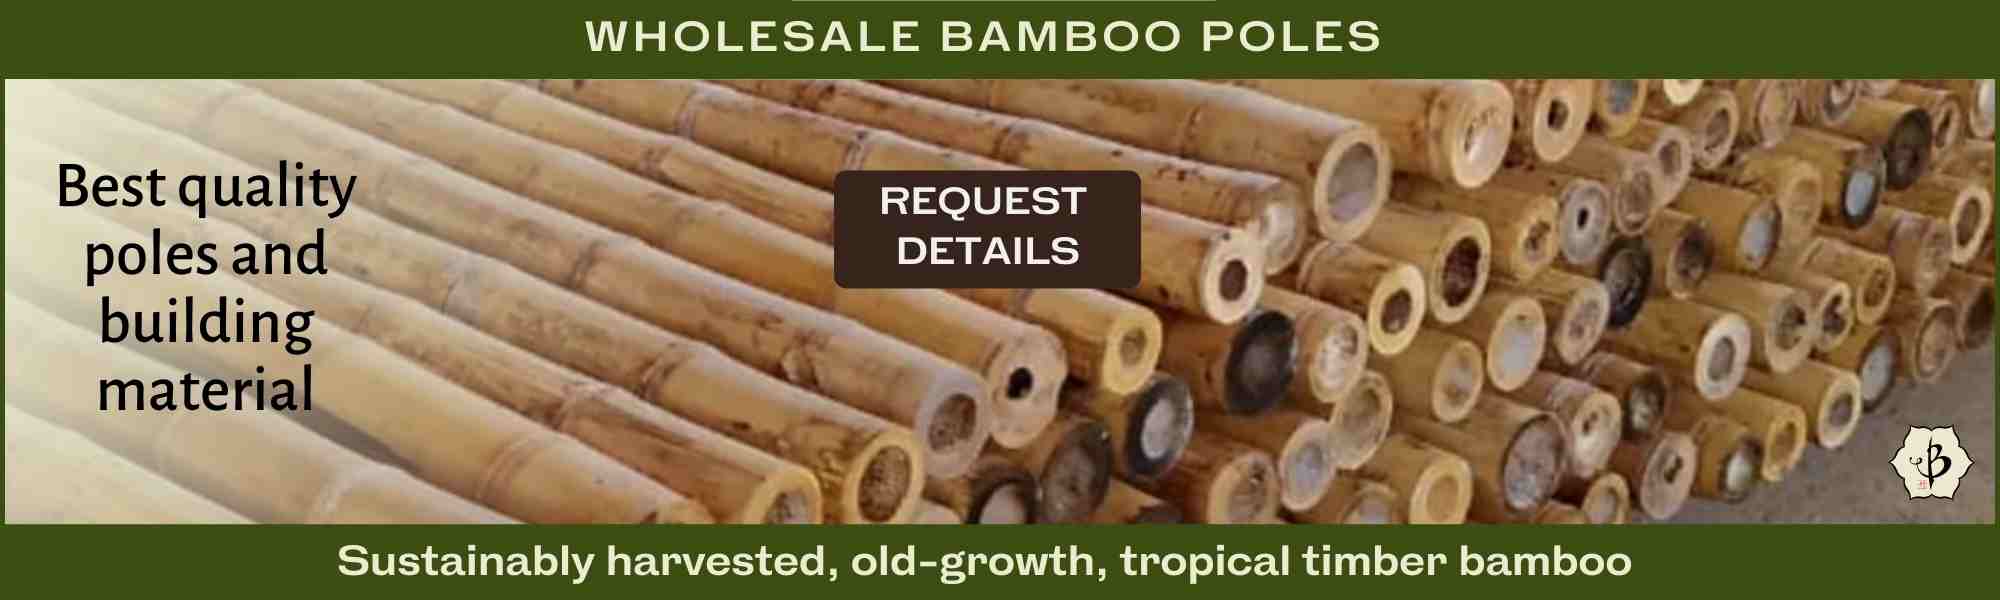 Wholesale Bamboo Pole Banner